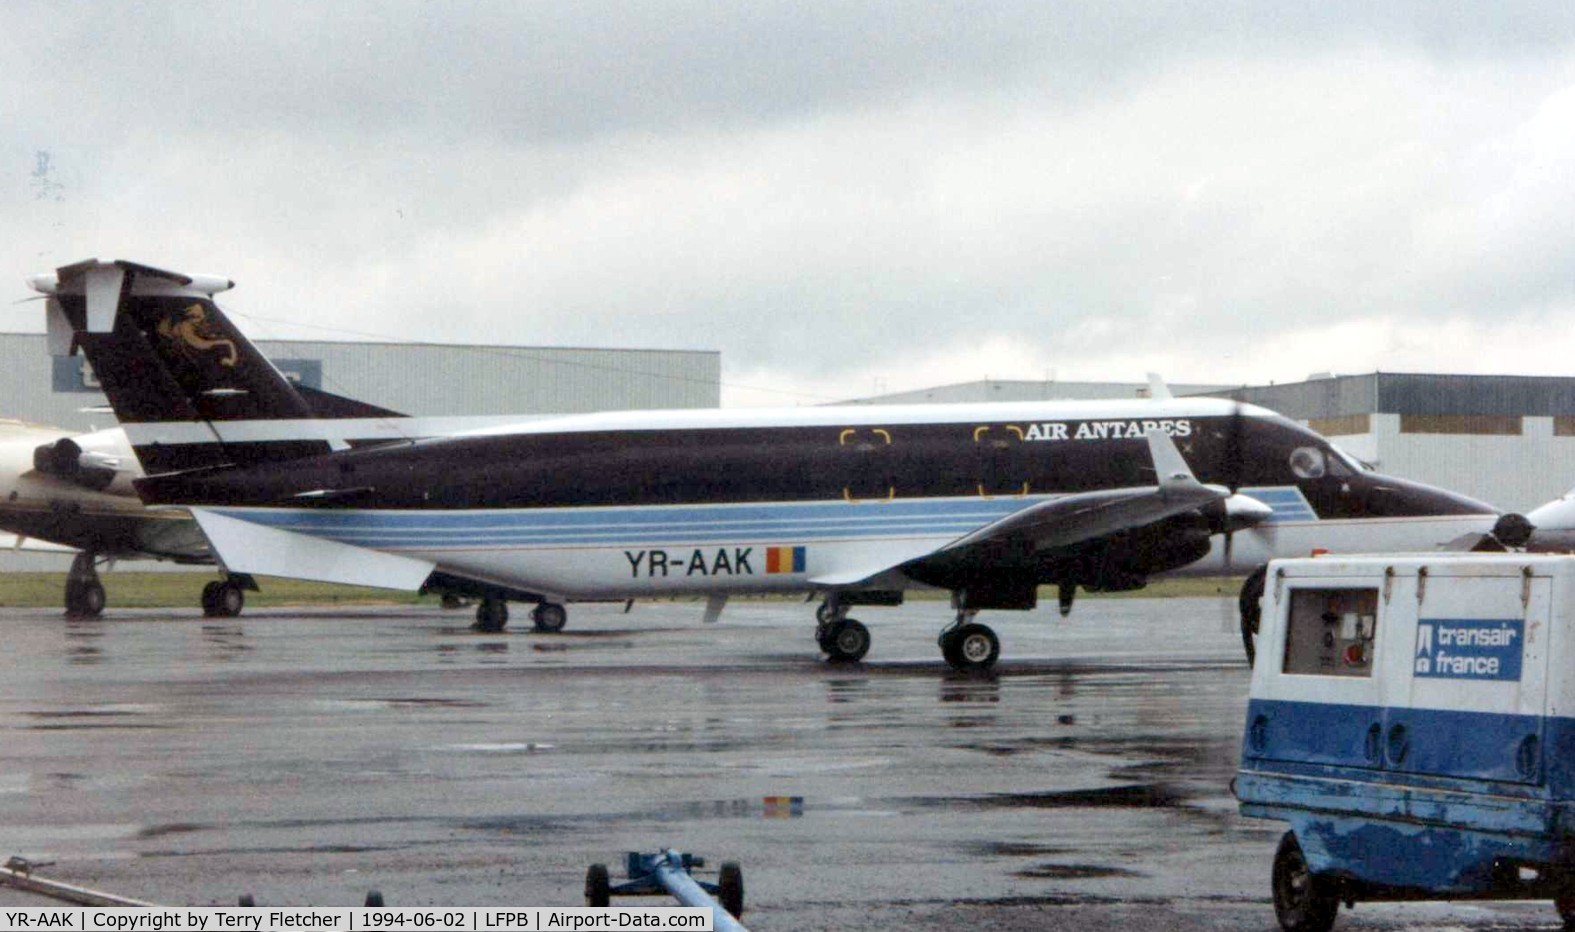 YR-AAK, 1993 Beech 1900D C/N UE-69, Air Antares B1900D c/n UE-69 , sits on the Paris Le Bourget ramp